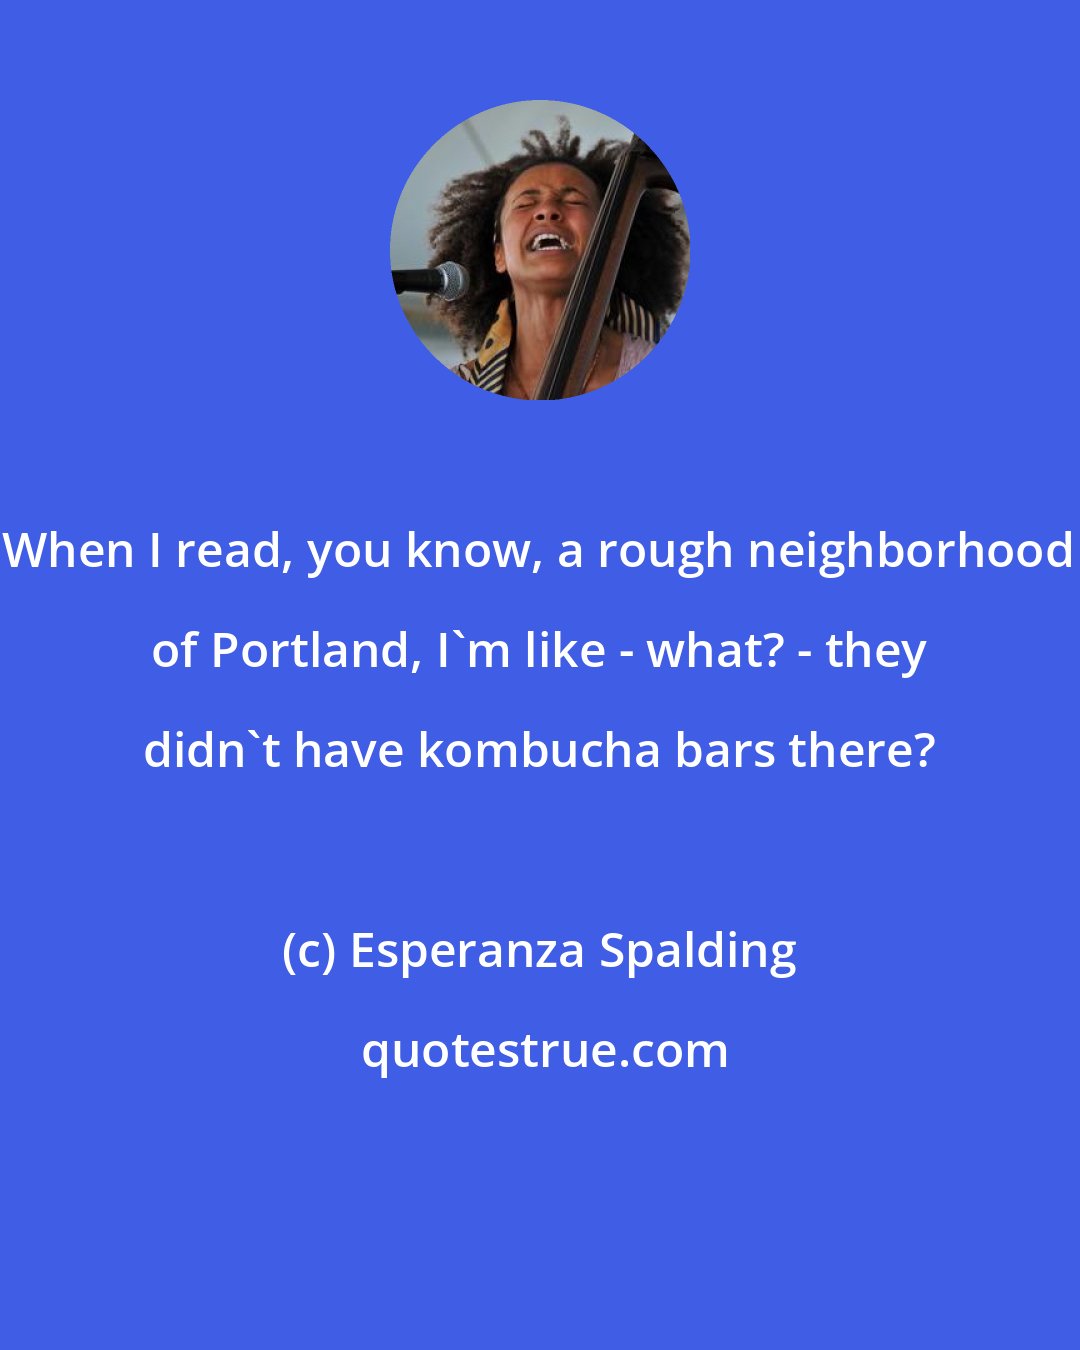 Esperanza Spalding: When I read, you know, a rough neighborhood of Portland, I'm like - what? - they didn't have kombucha bars there?